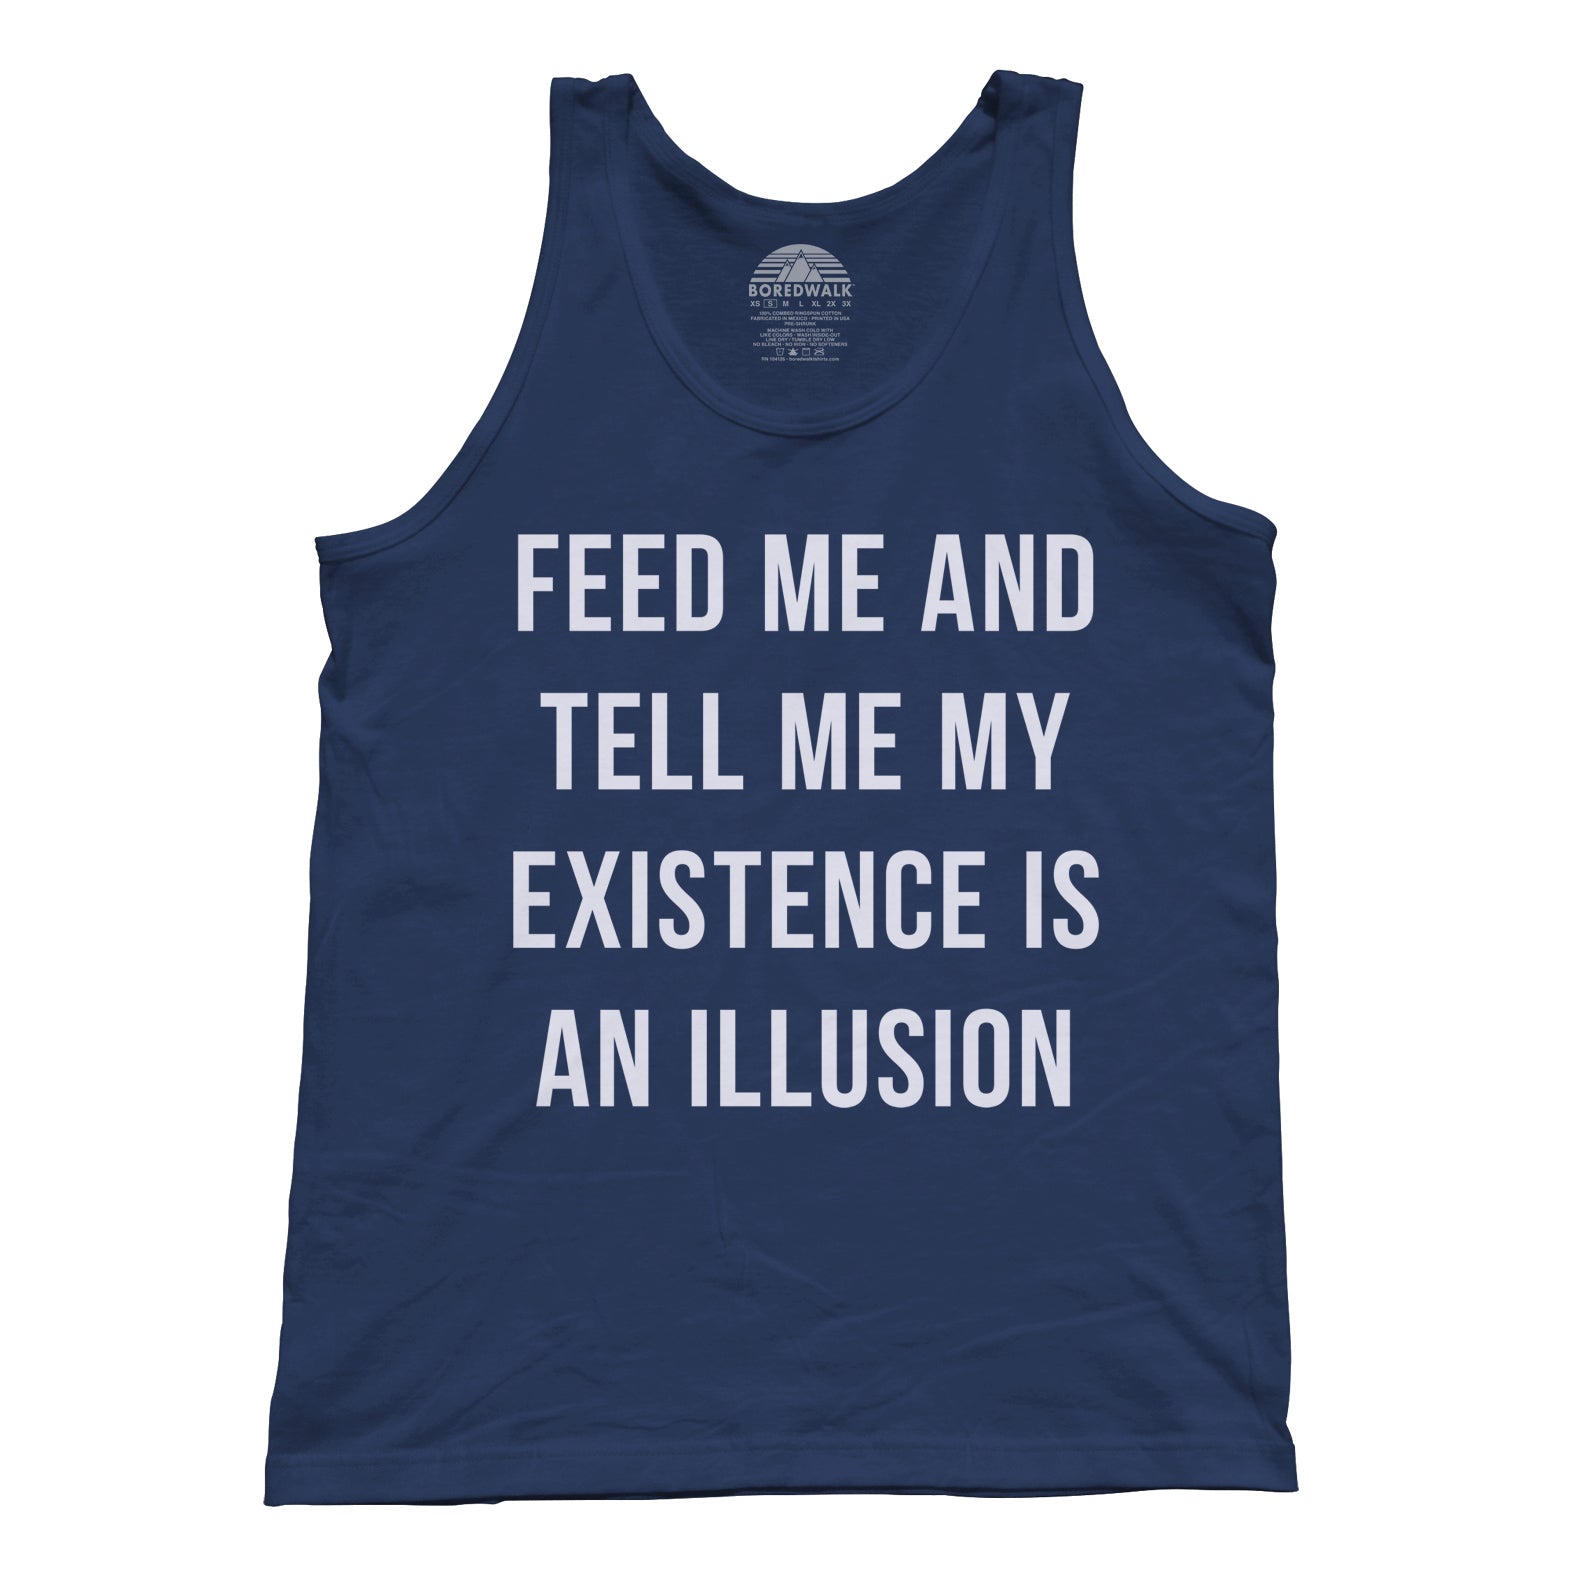 Unisex Feed Me and Tell Me My Existence is an Illusion Tank Top - Existentialism Shirt